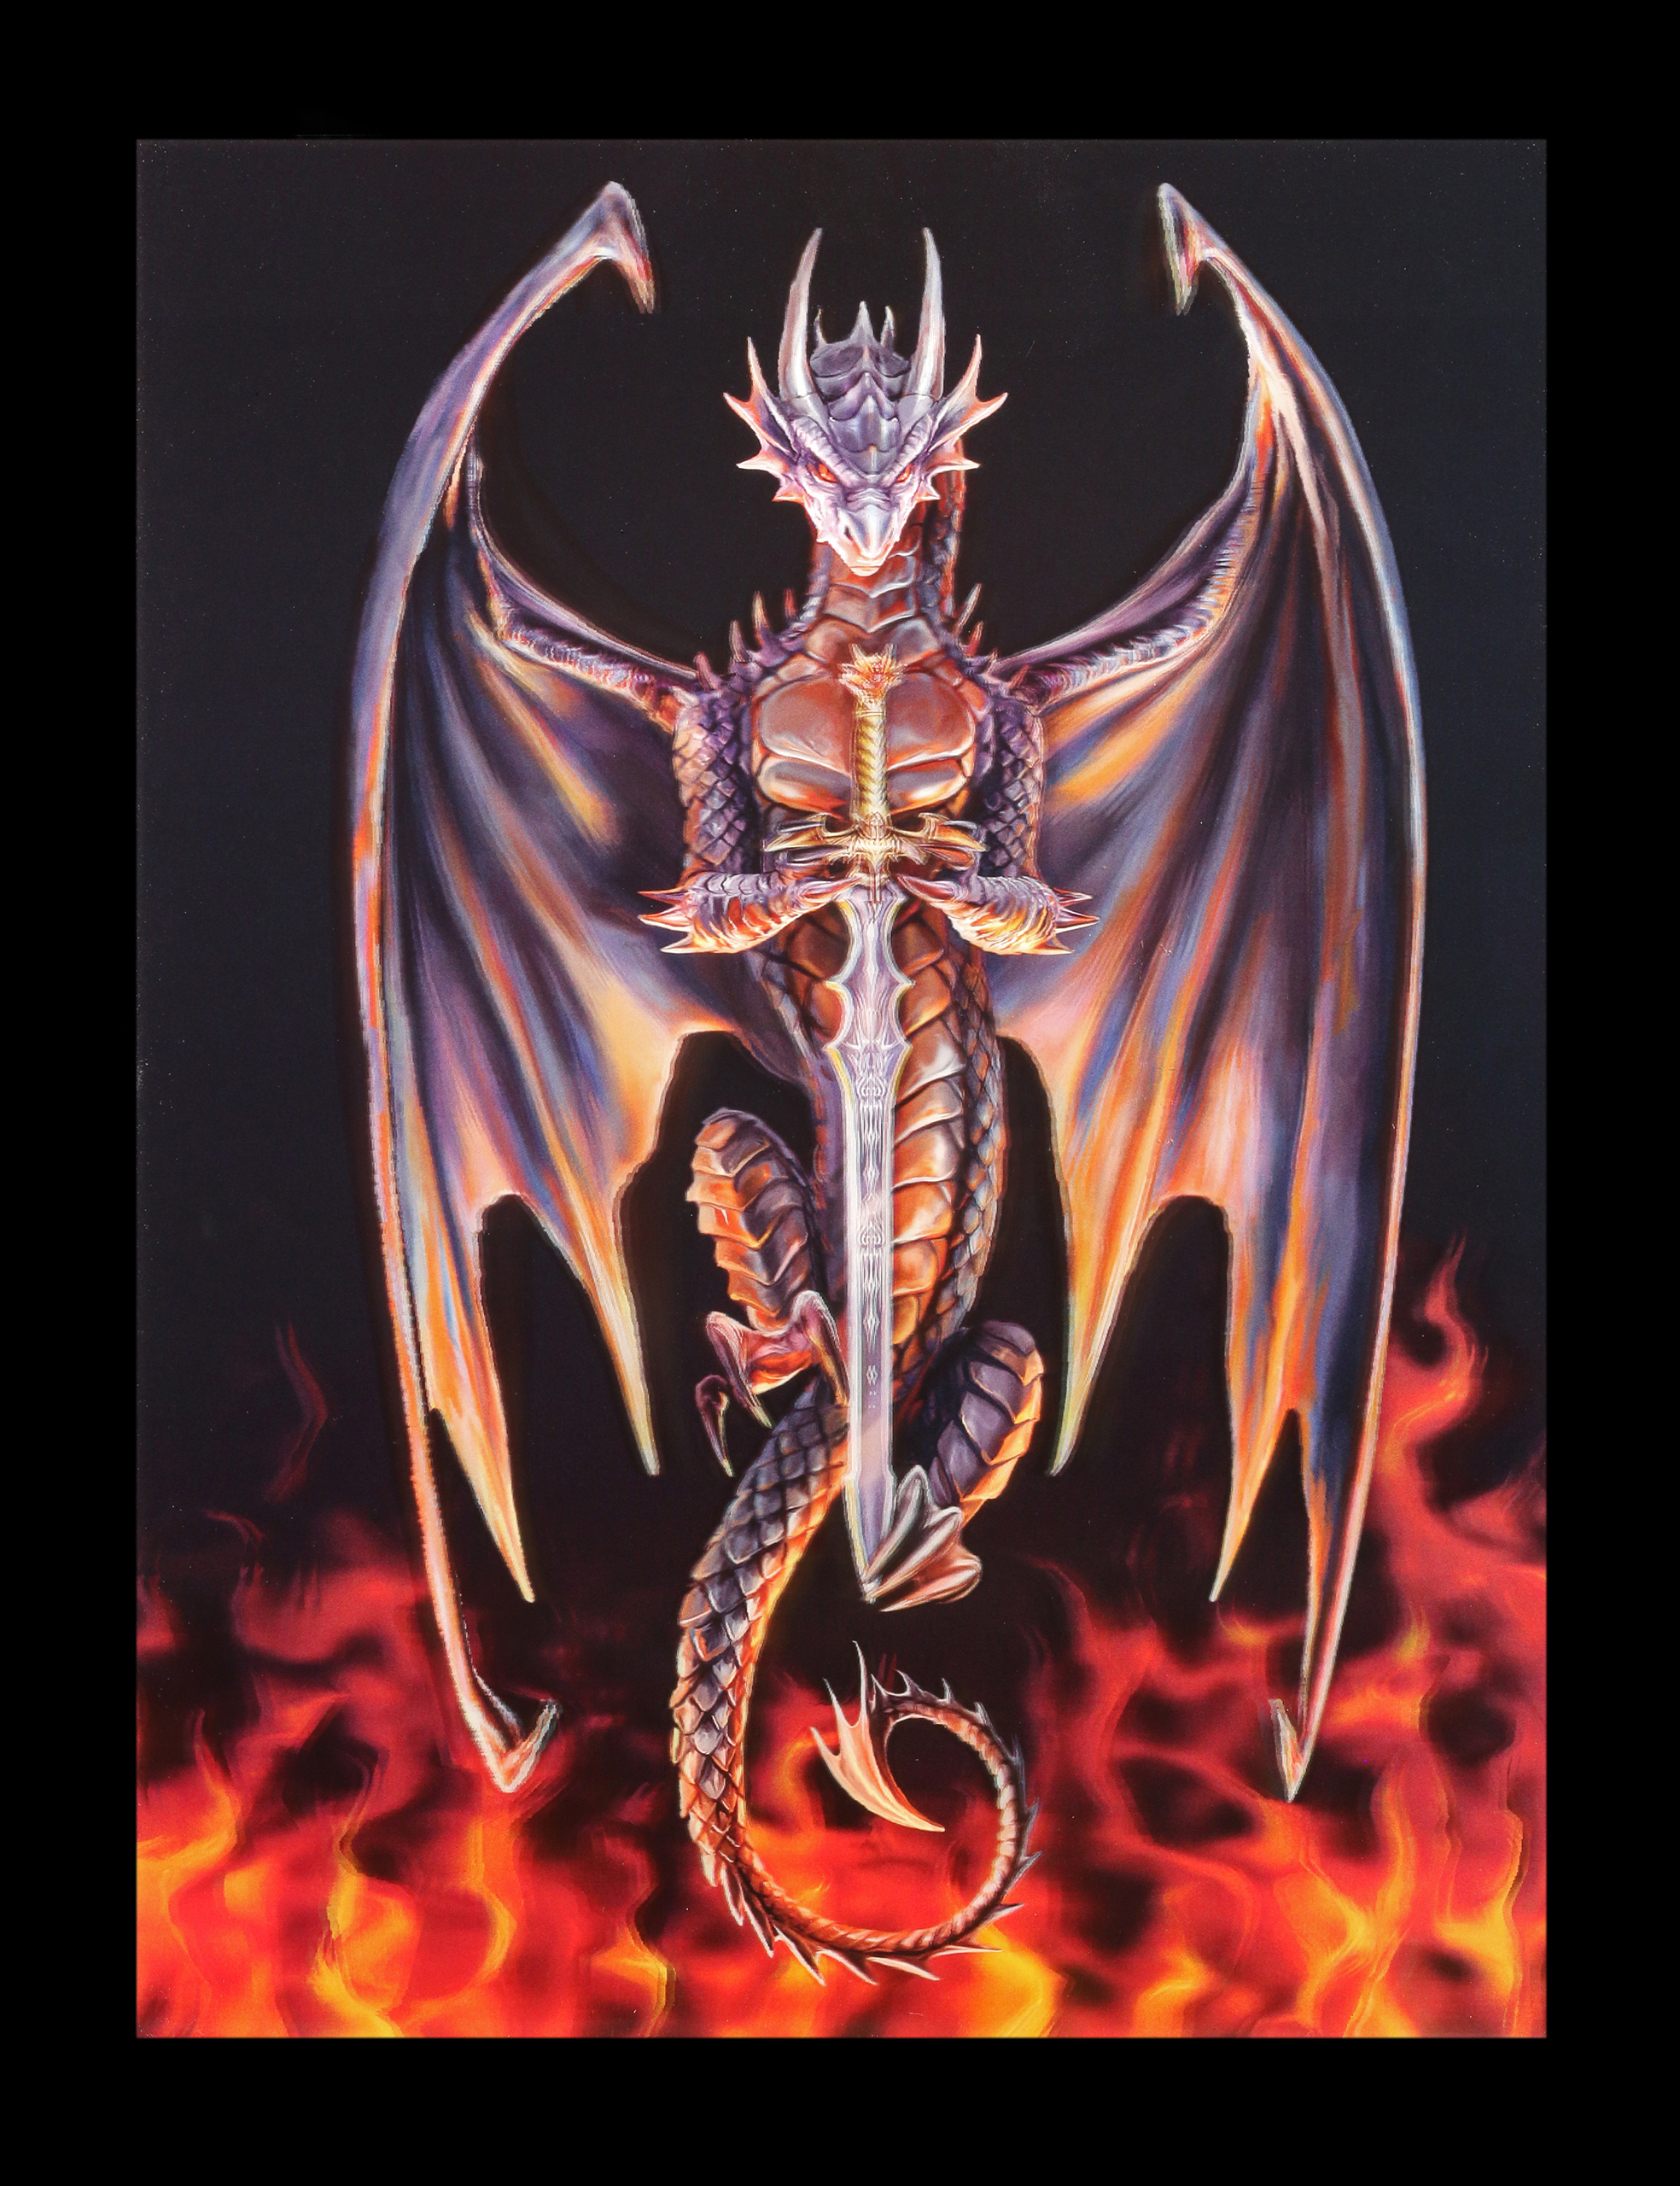 3D Picture Gothic Art Anne Stokes Dragon Dancer Size 39 x 29 cm approx NEW